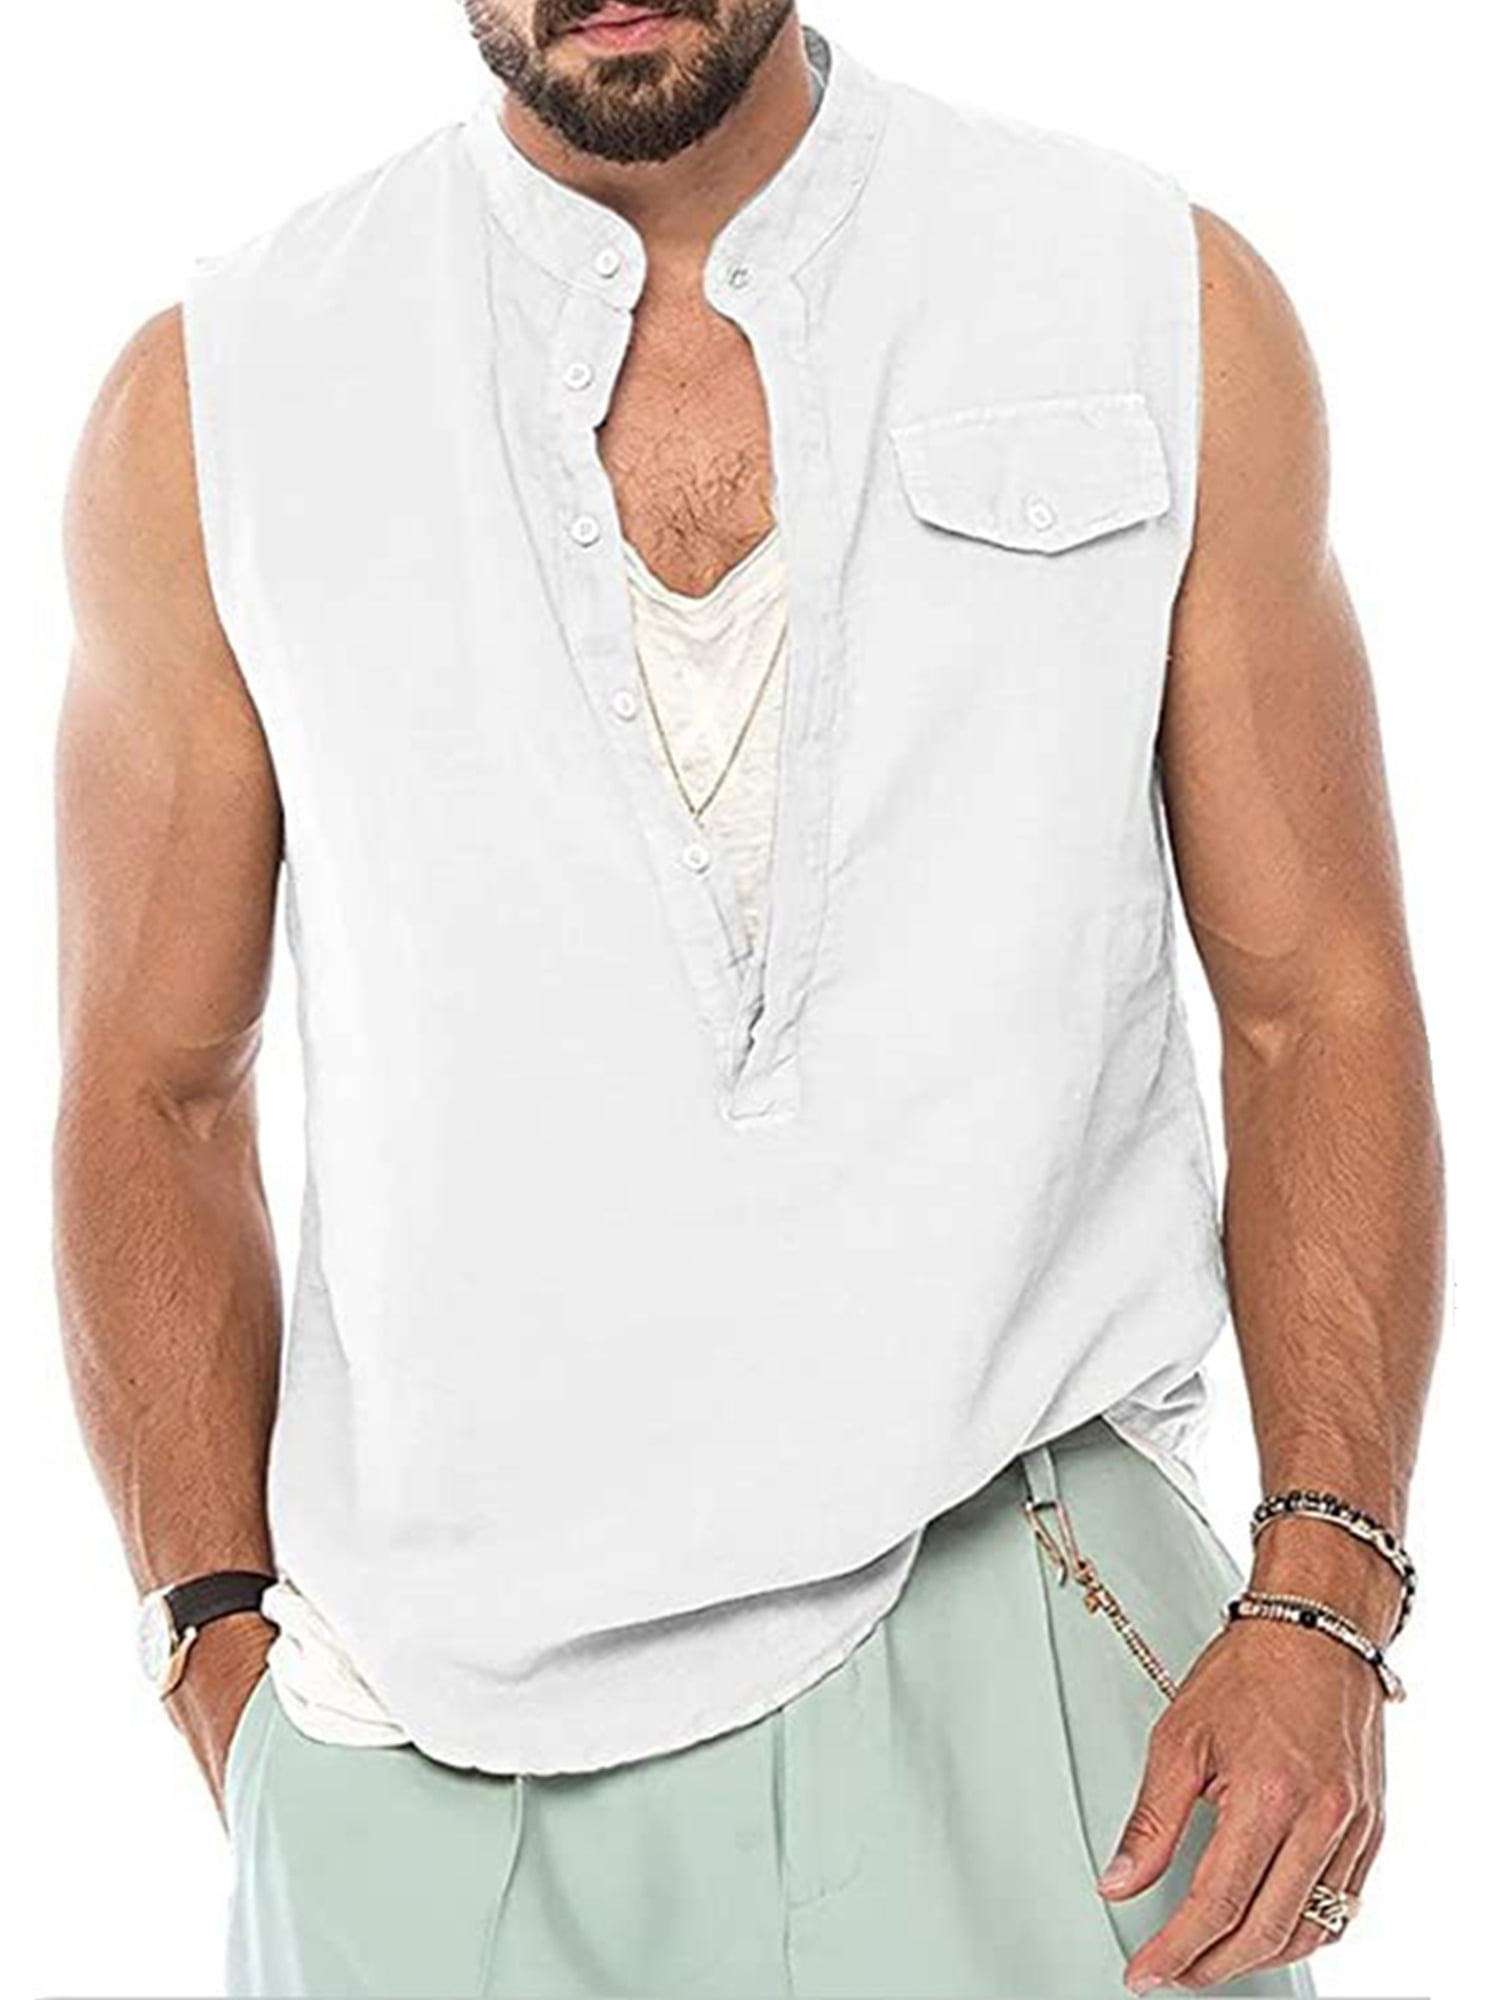 Mens Clothing T-shirts Sleeveless t-shirts ASOS Cotton Muscle Vest in White for Men 